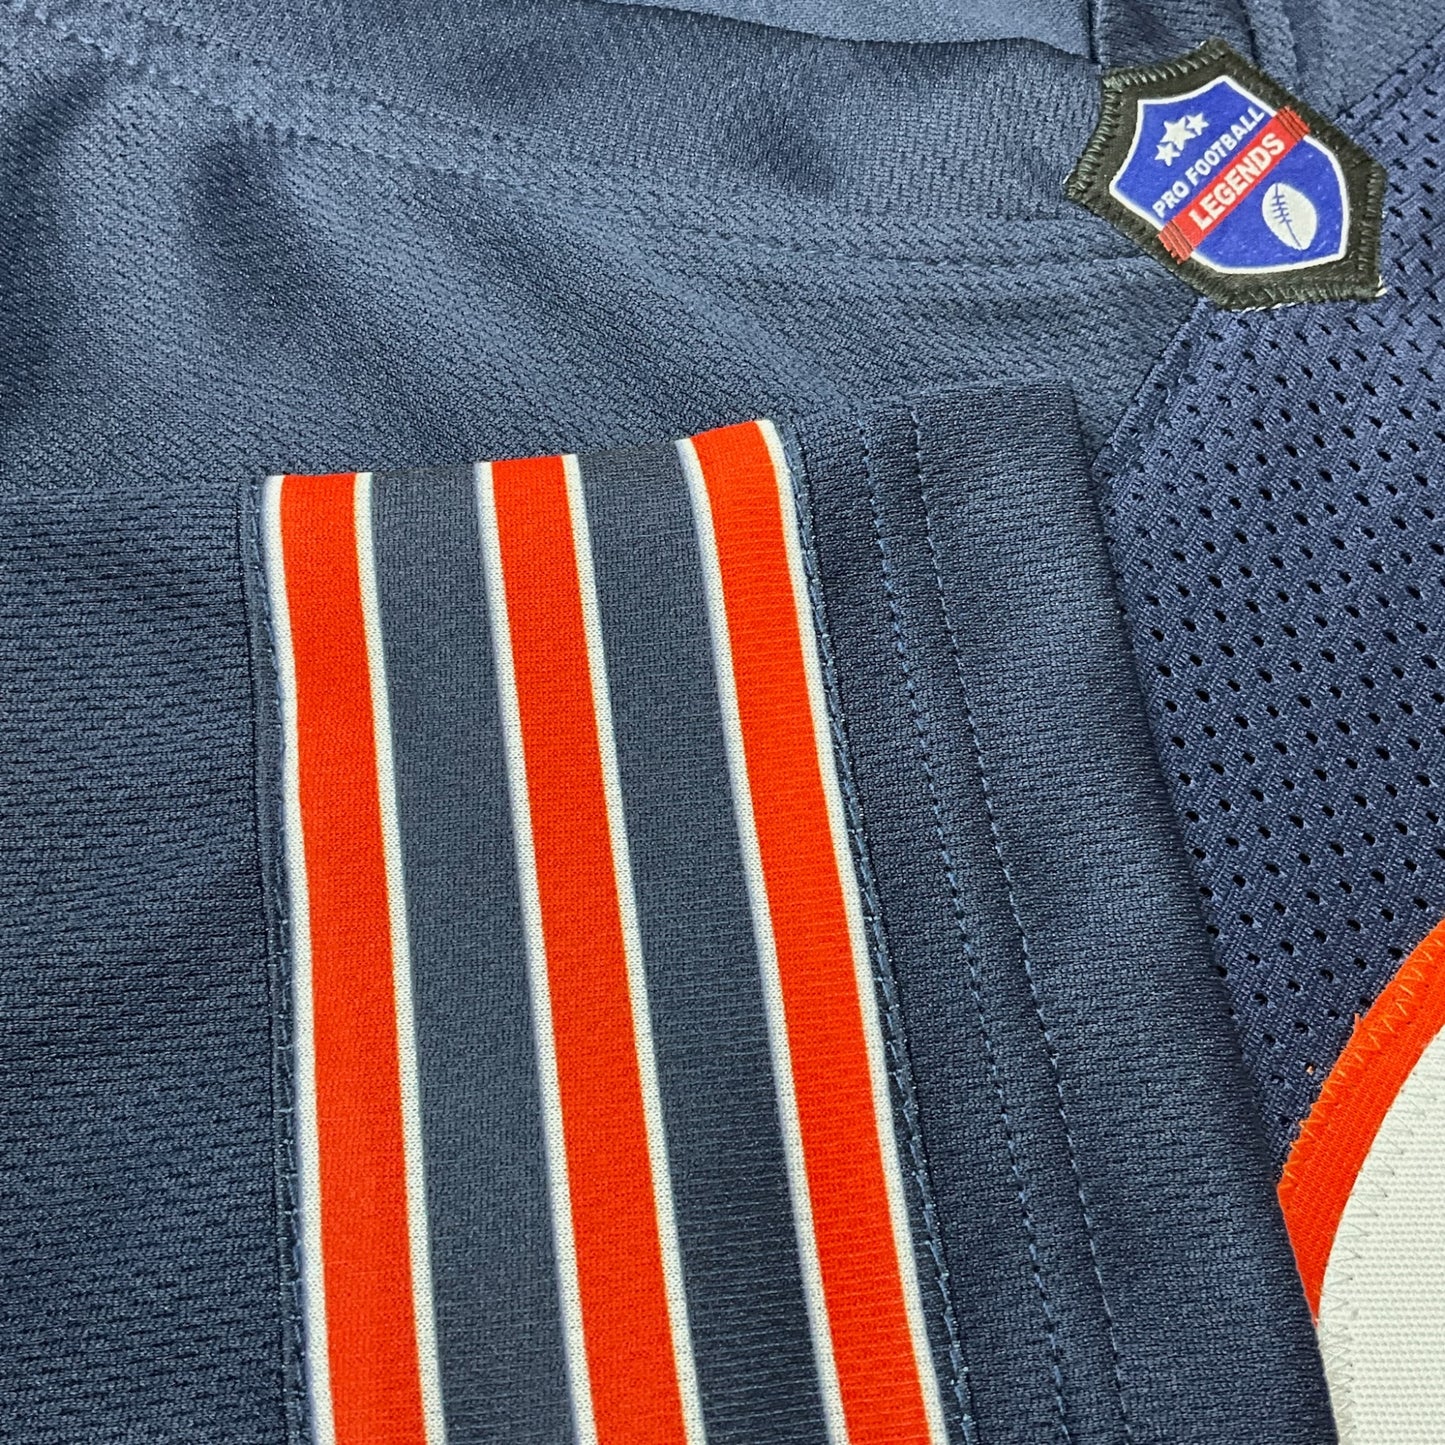 Gale Sayers Jersey Blue Chicago | S-5XL Custom Sewn Stitched